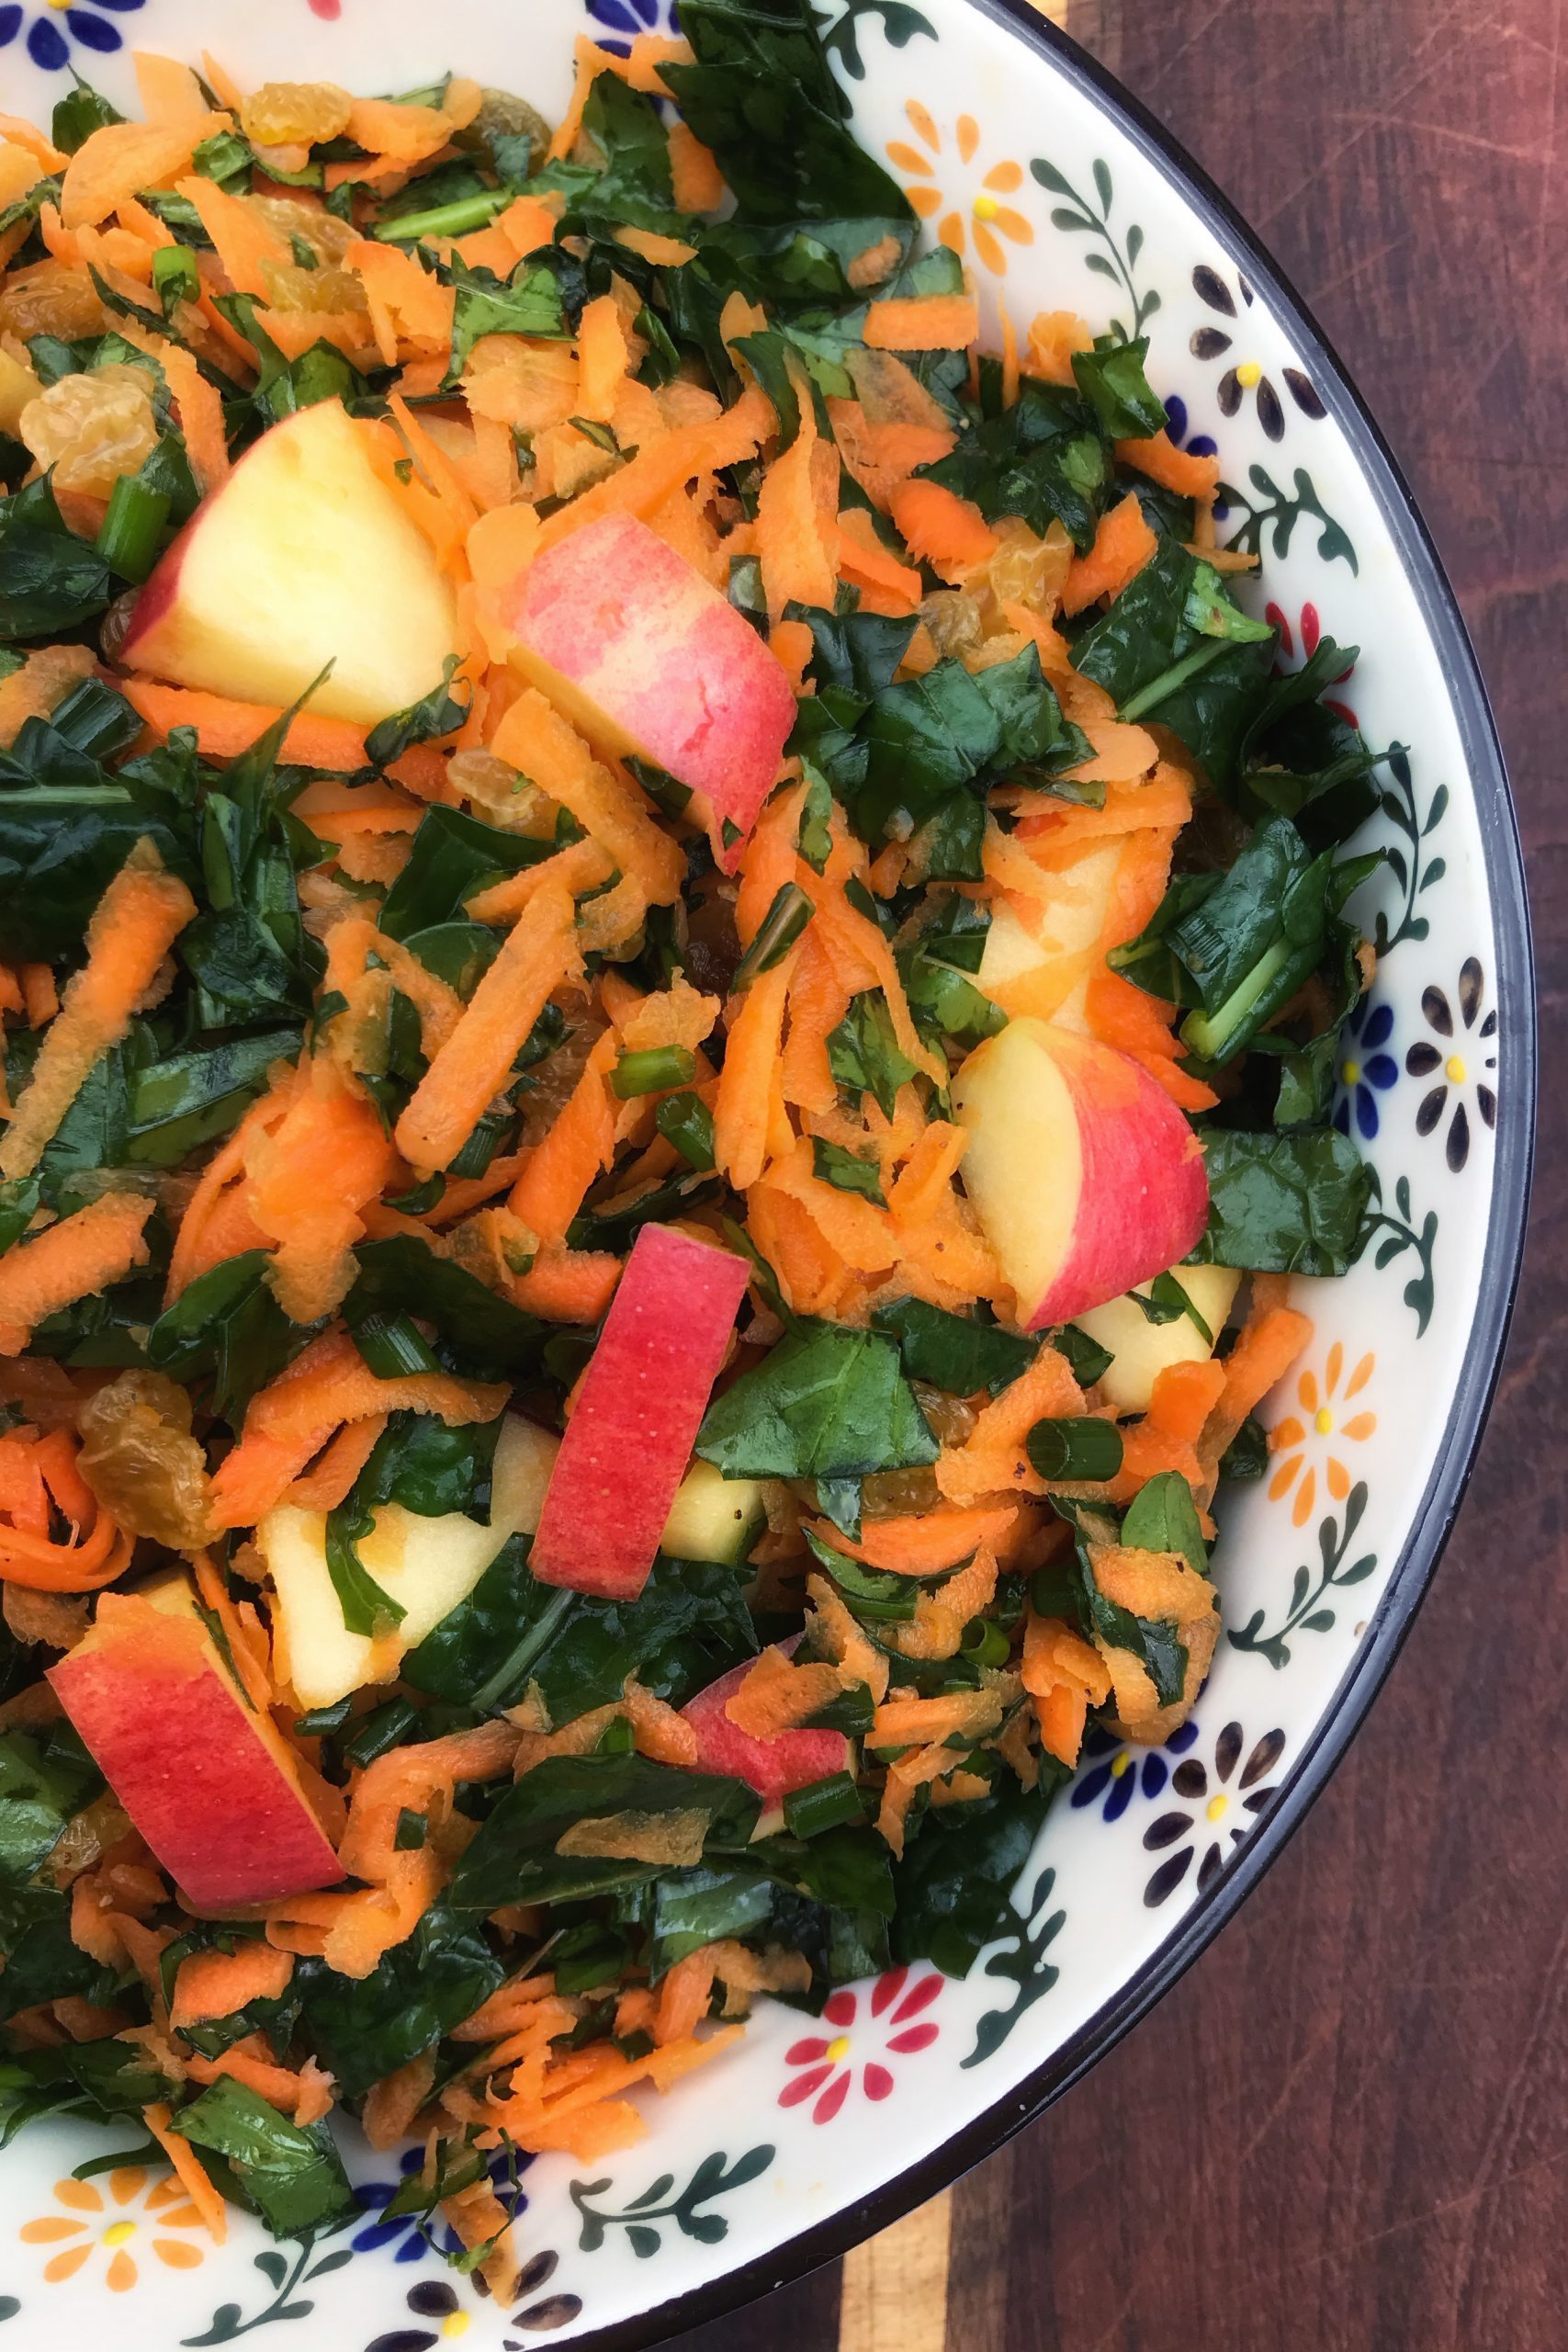 Kale Slaw with Apples, Carrots and Raisins in a bowl